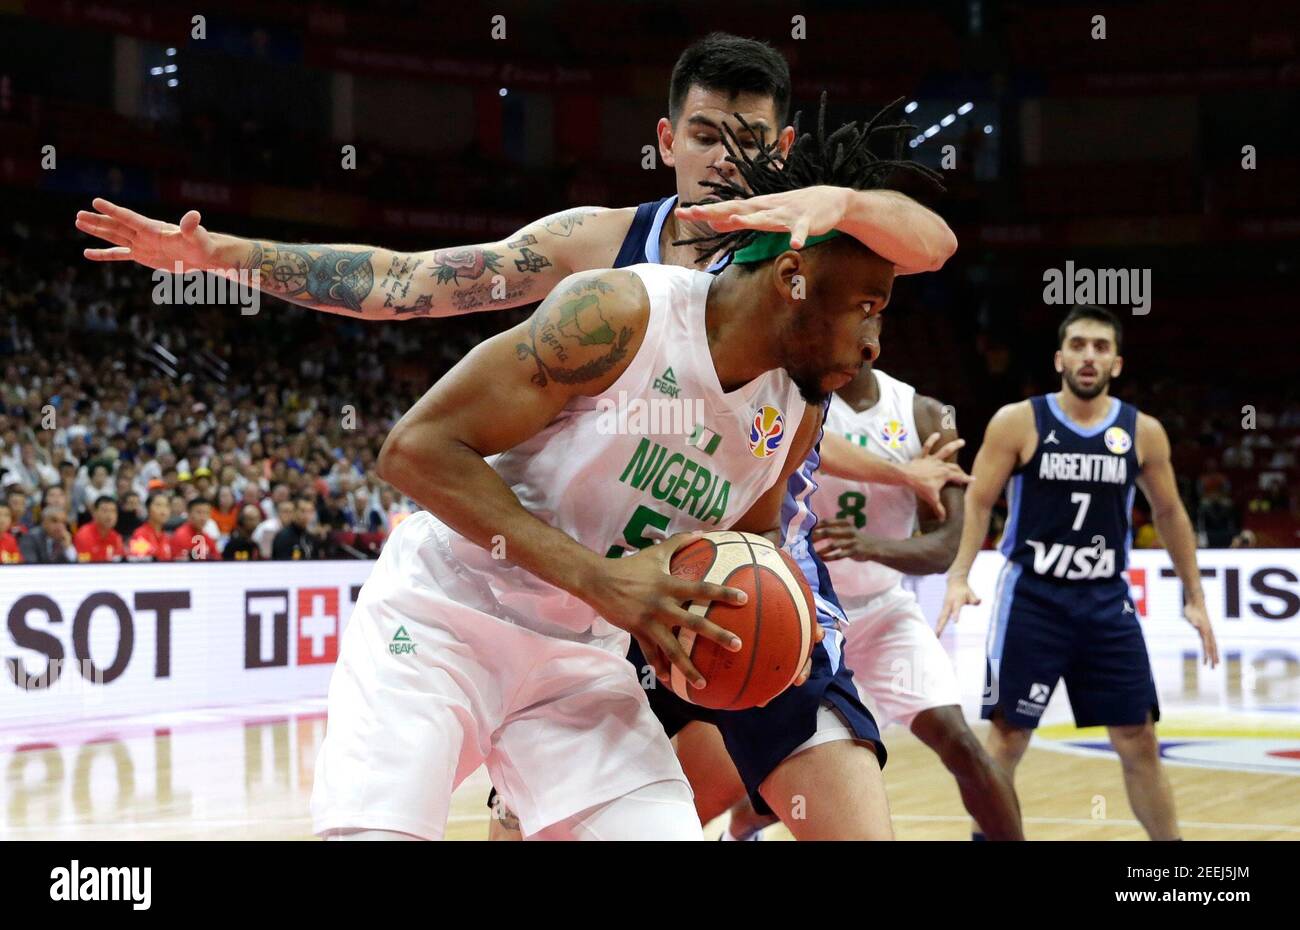 Basketball - FIBA World Cup - First Round - Group B - Nigeria v Argentina - Wuhan Sports Center, Wuhan, China - September 2, 2019 Nigeria's Stan Okoye in action with Argentina's Gabriel Deck REUTERS/Jason Lee Stock Photo